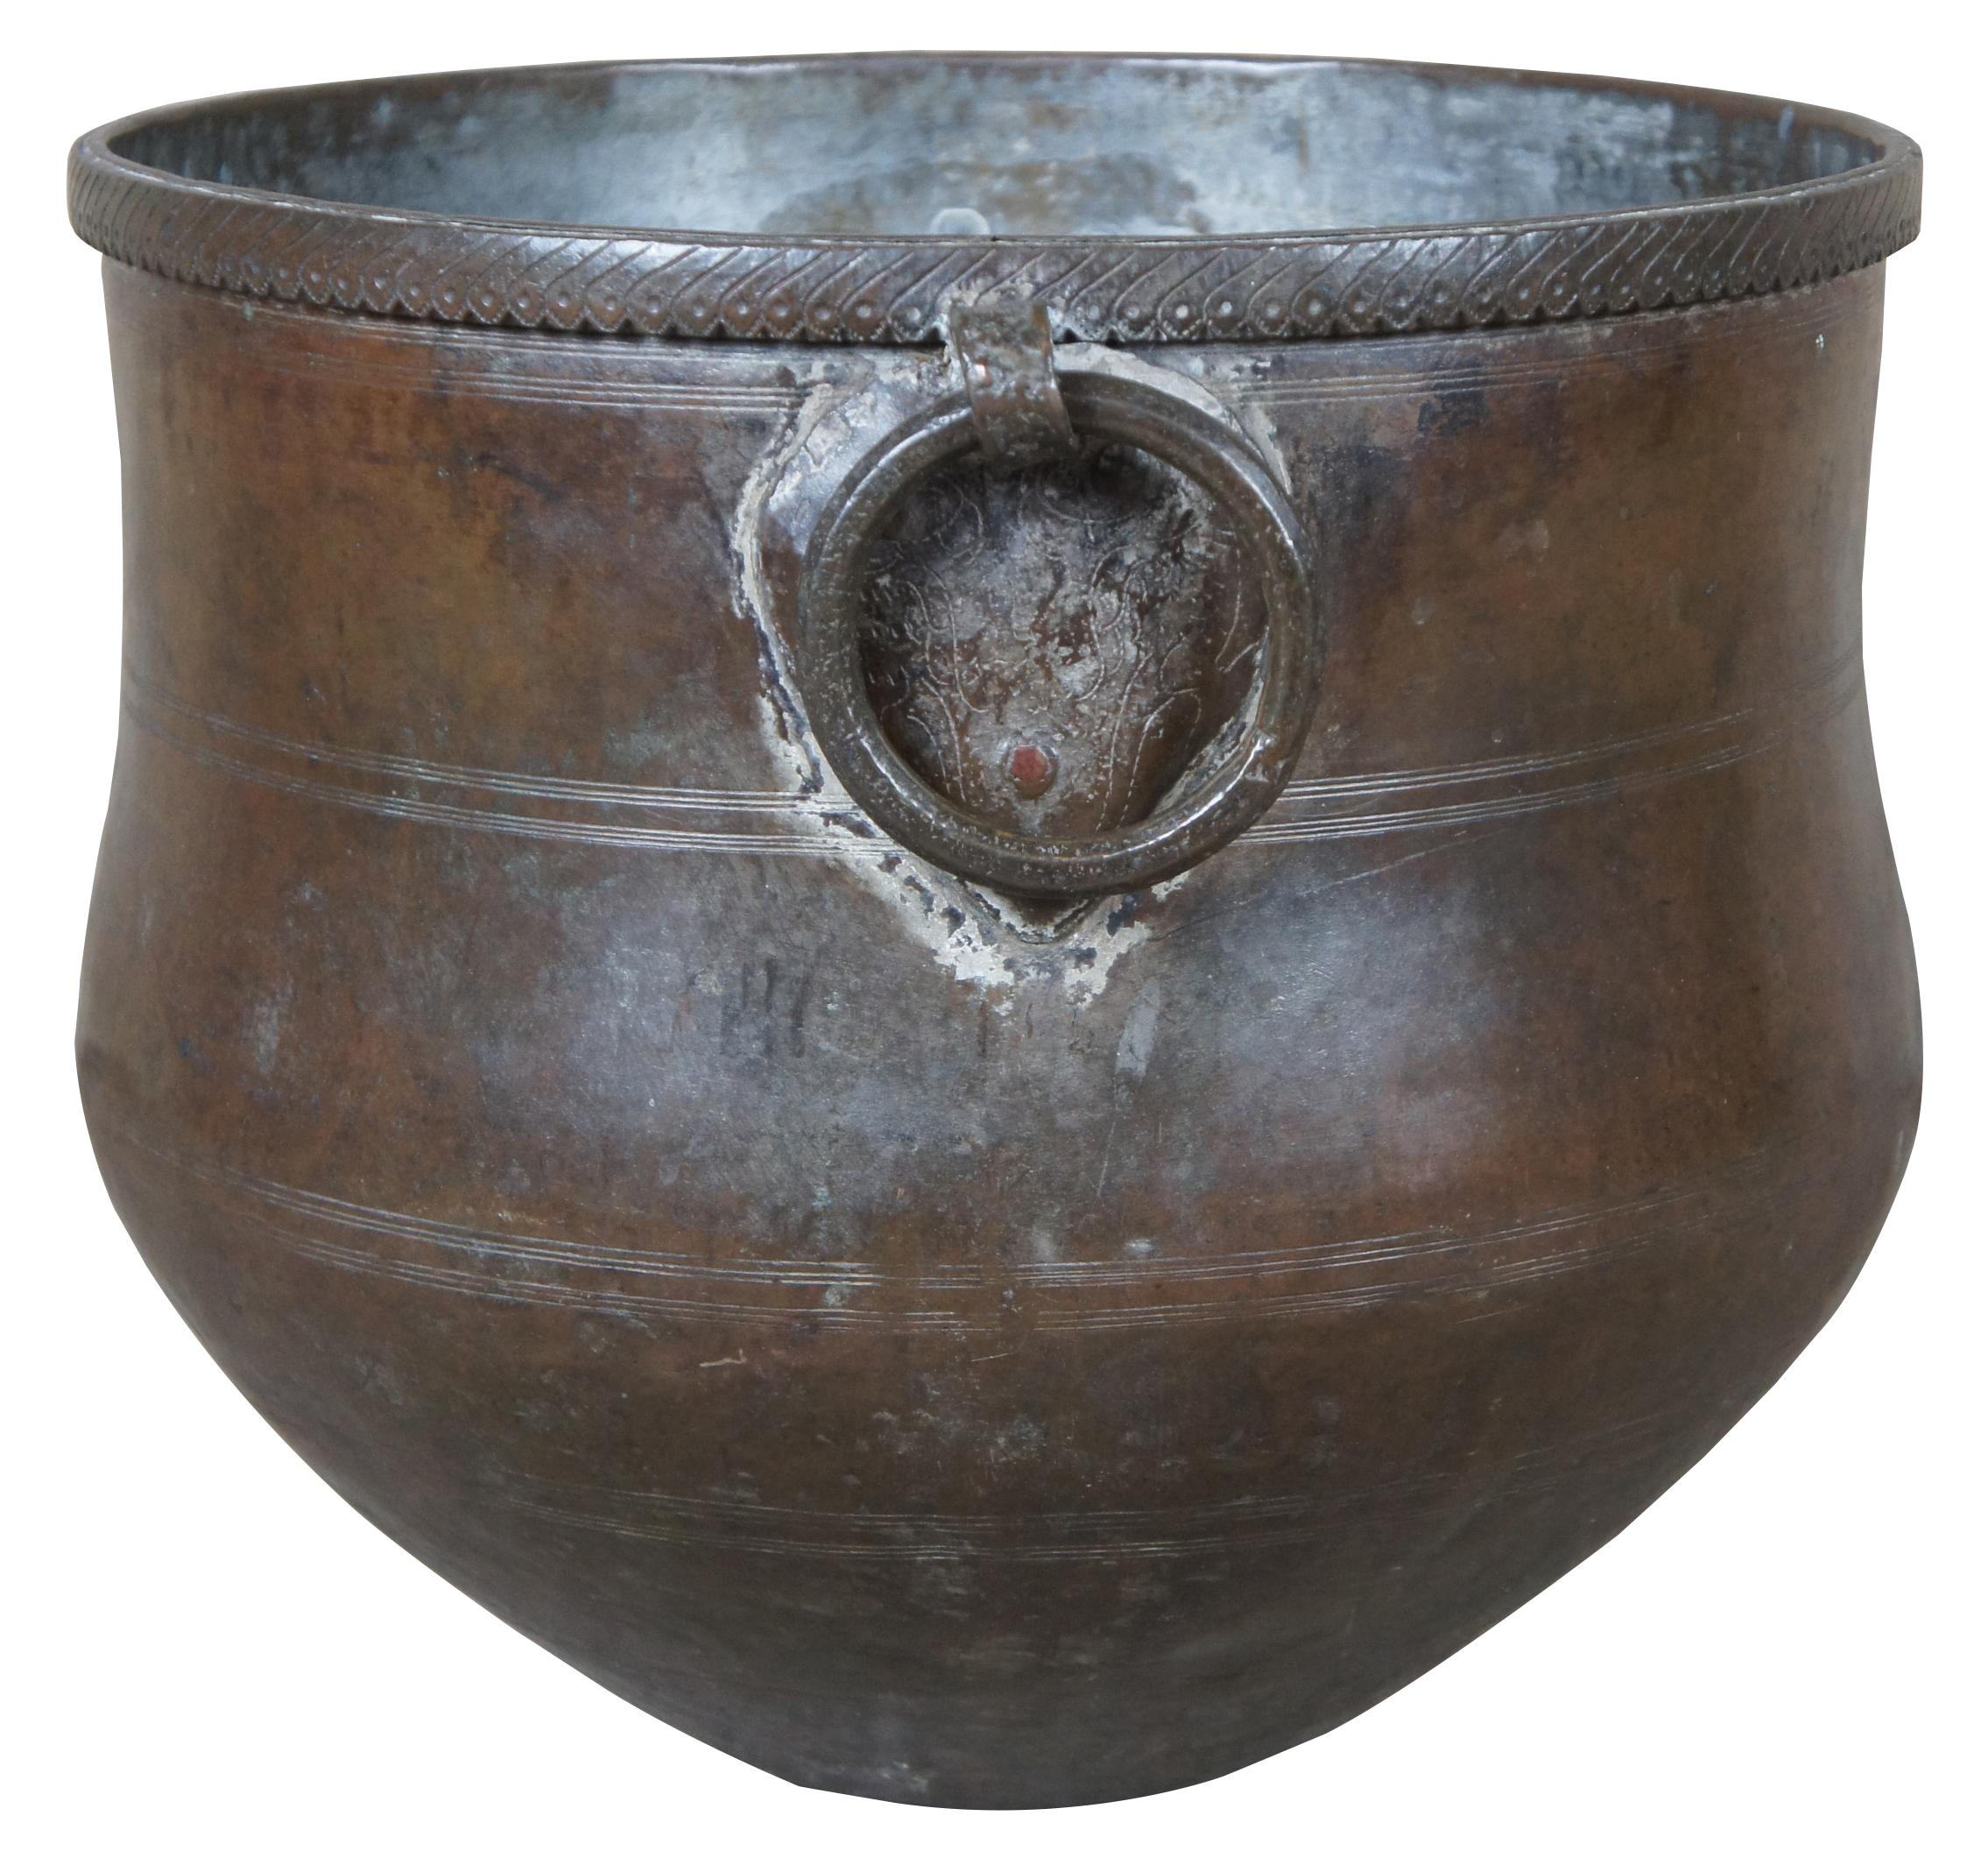 A monumental hammered copper vessel or water storage pot. Round with tapered base and Iron ring handles. Features a chased iron rim. 
   